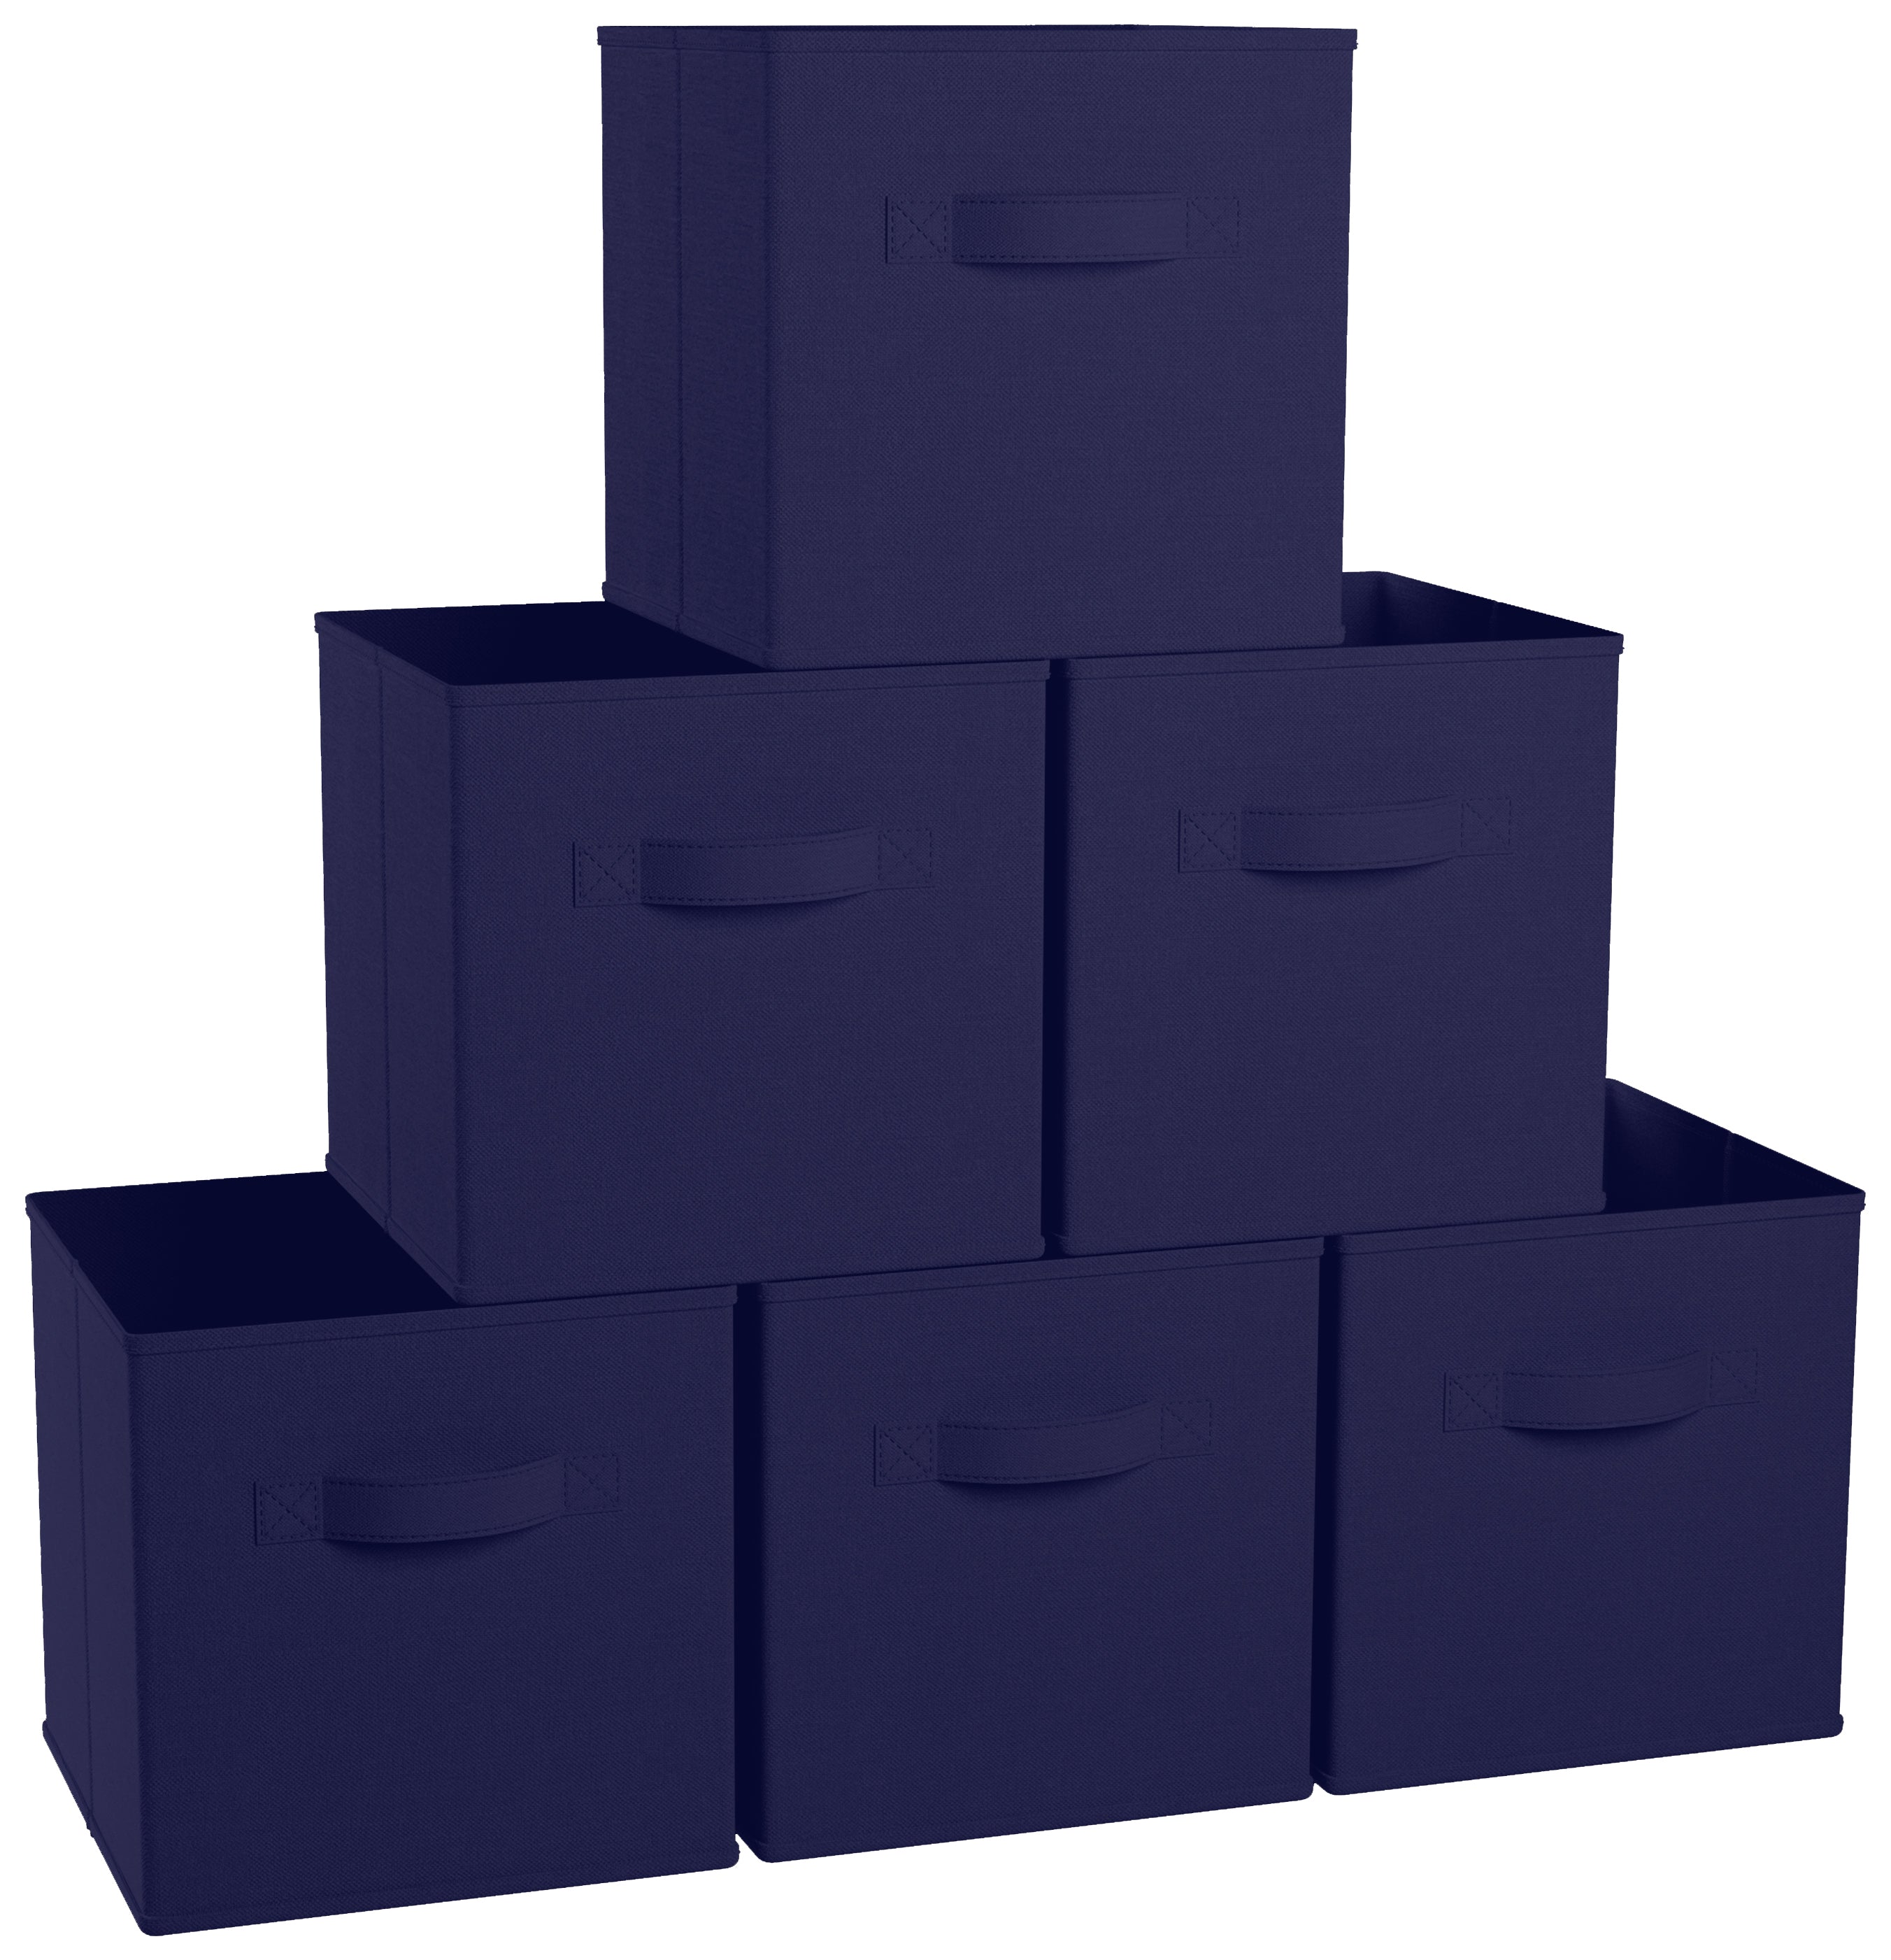 Ornavo Home Foldable Storage Cube Bin with Dual Handles 11 x 11 x 11 / Navy